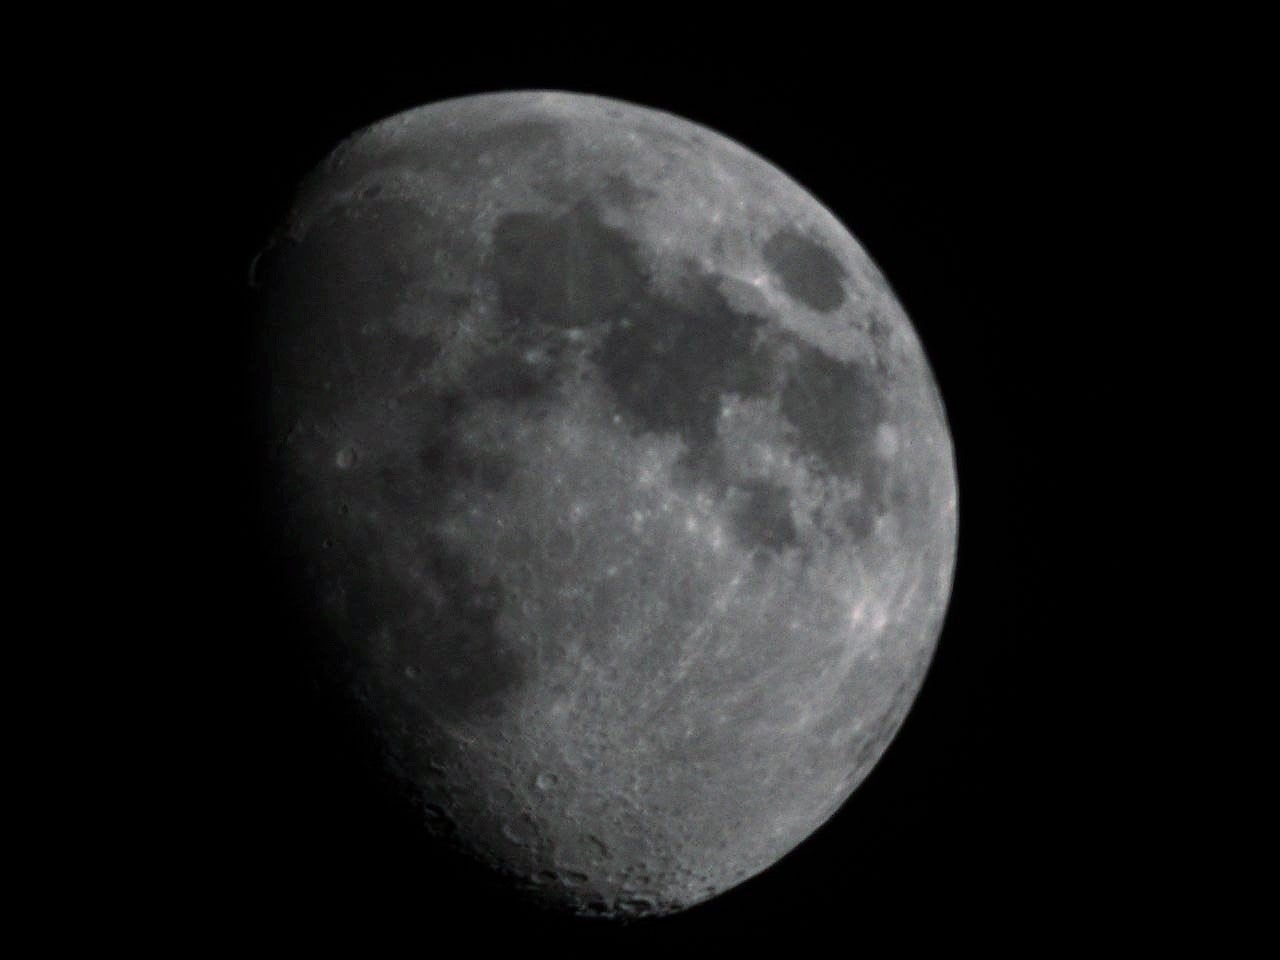 A live view of the Moon captured using a Unistellar eQuinox 2 smart telescope